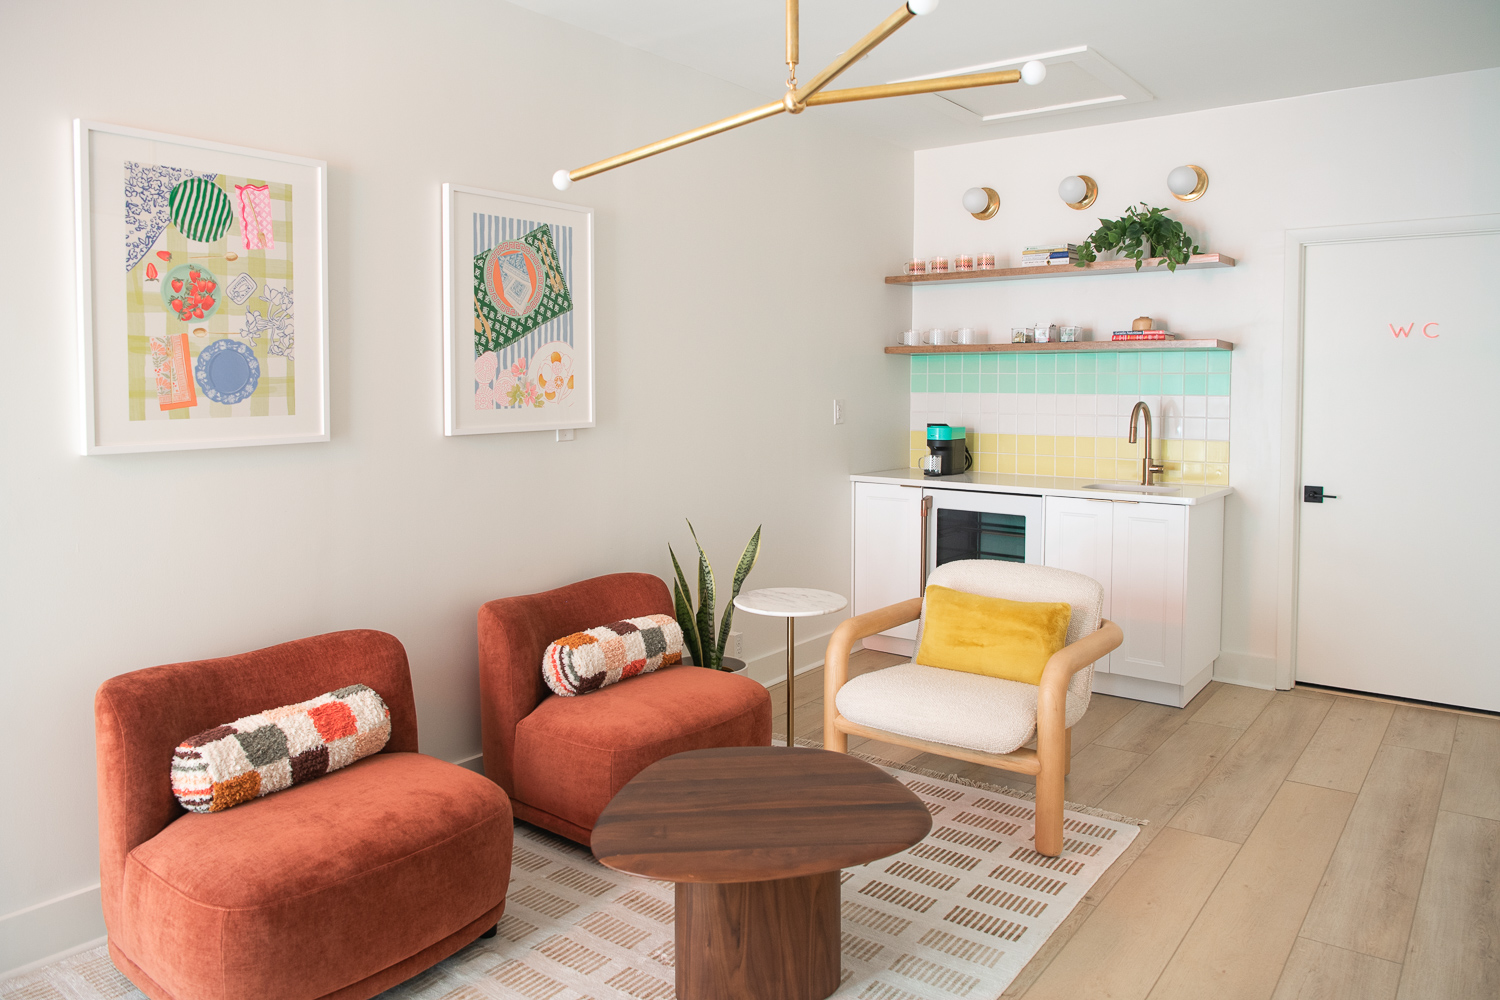 small seating area with orange chairs and kitchenette